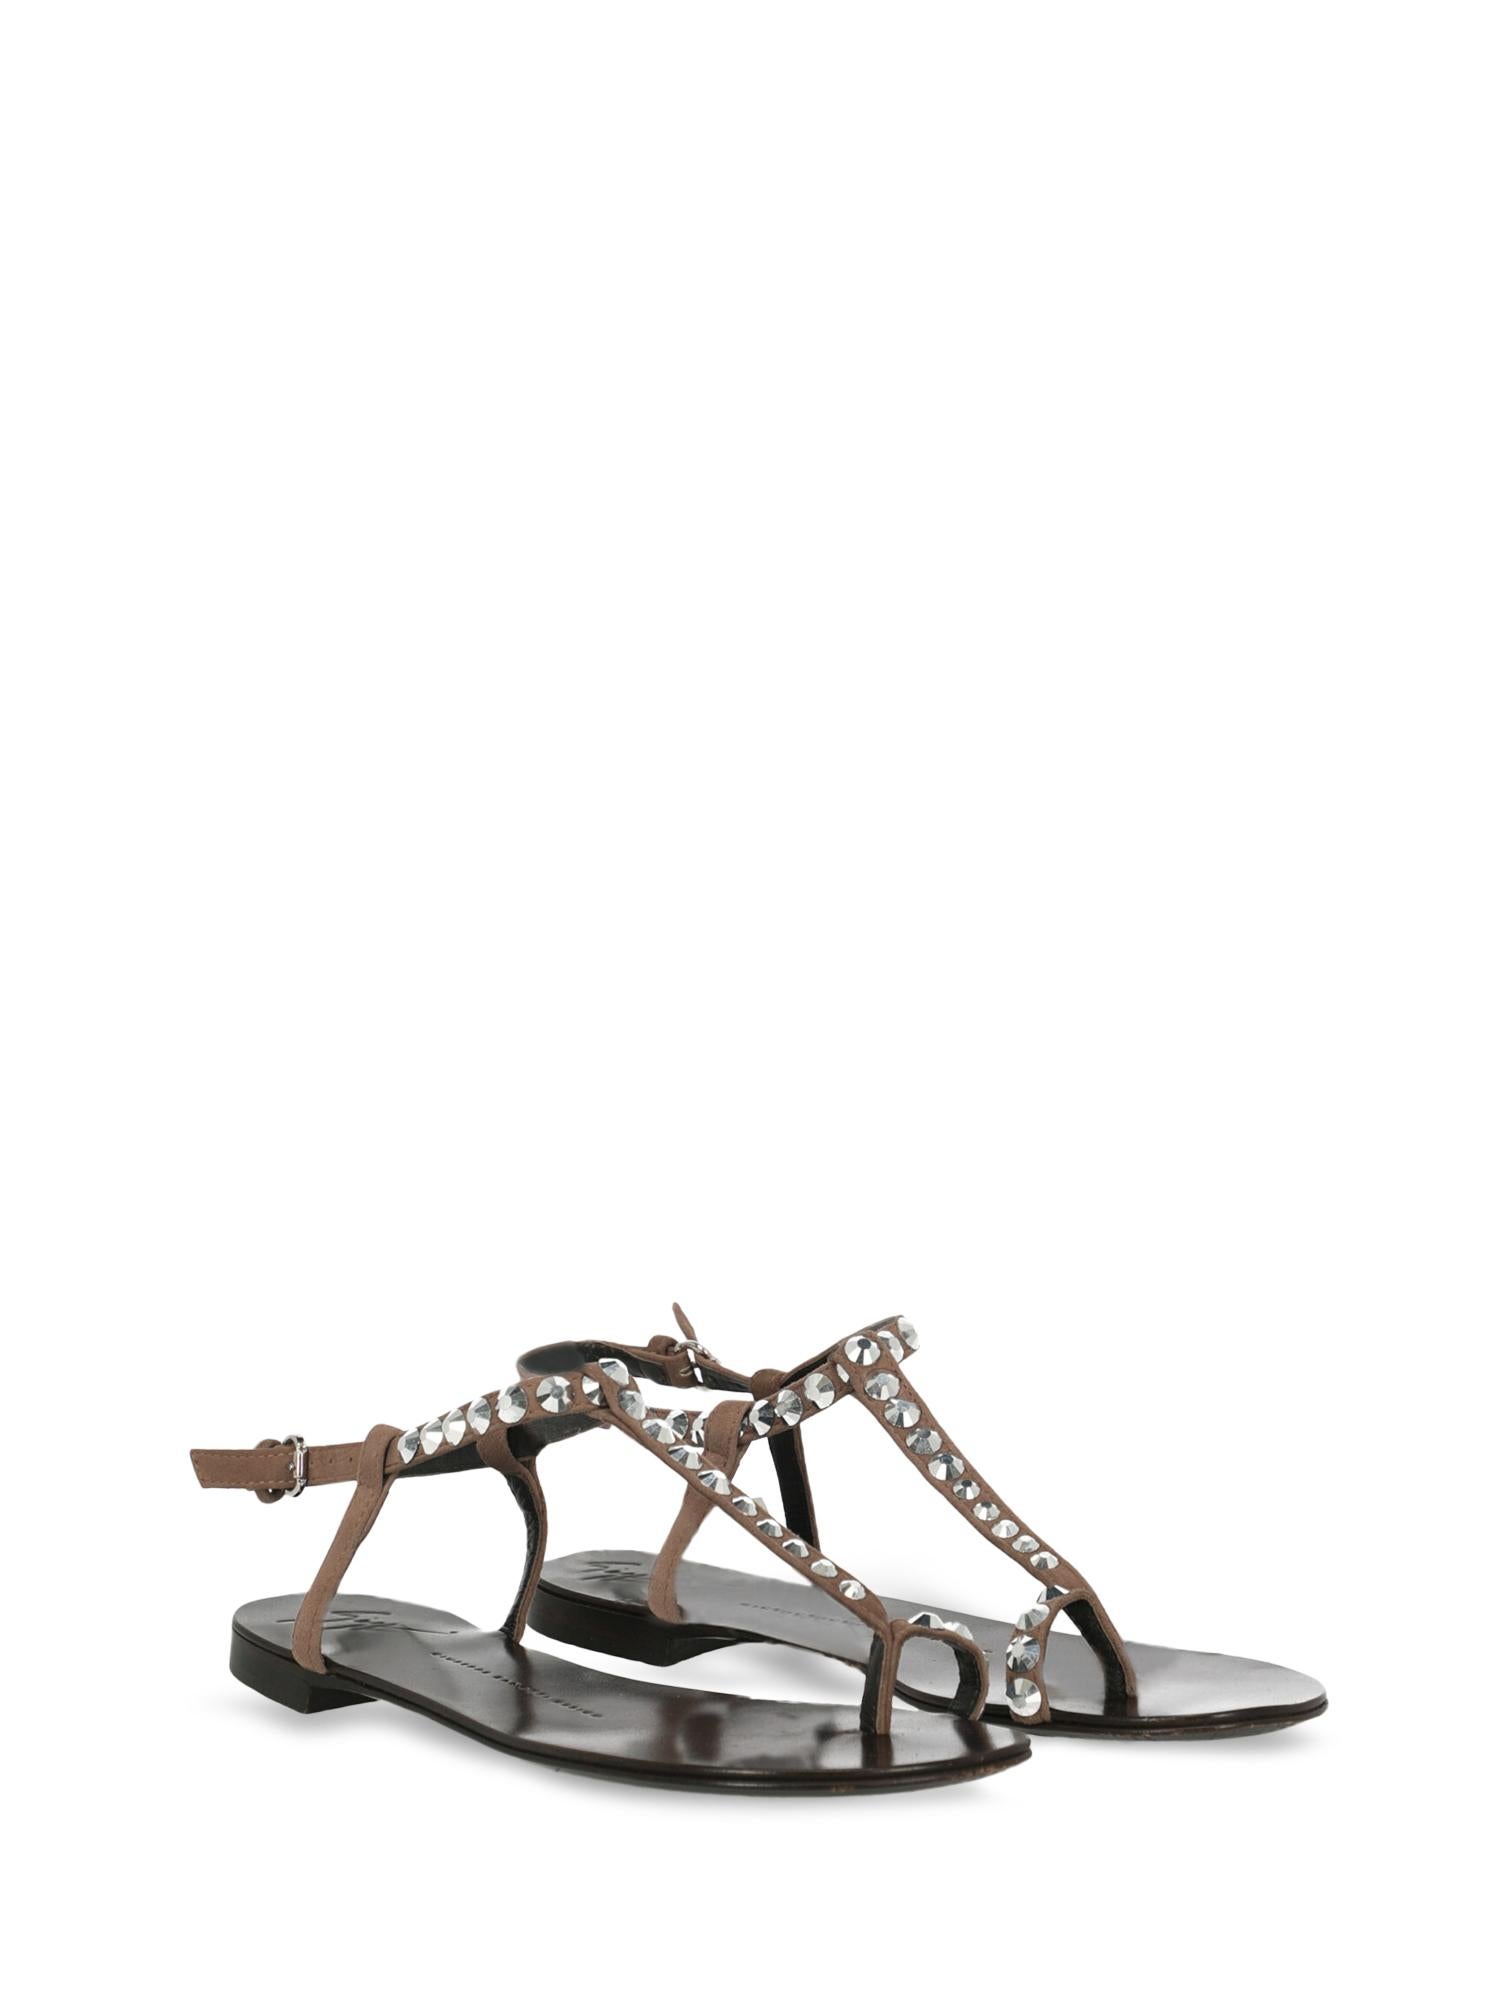 Shoe, leather, solid color, iconic detail, buckle fastening, silver-tone hardware, rockstud embellishment

Includes: N/A

Product Condition: Very Good
Sole: visible signs of use. Insole: visible scratches.

Measurements: N/A 

Composition:
Upper: